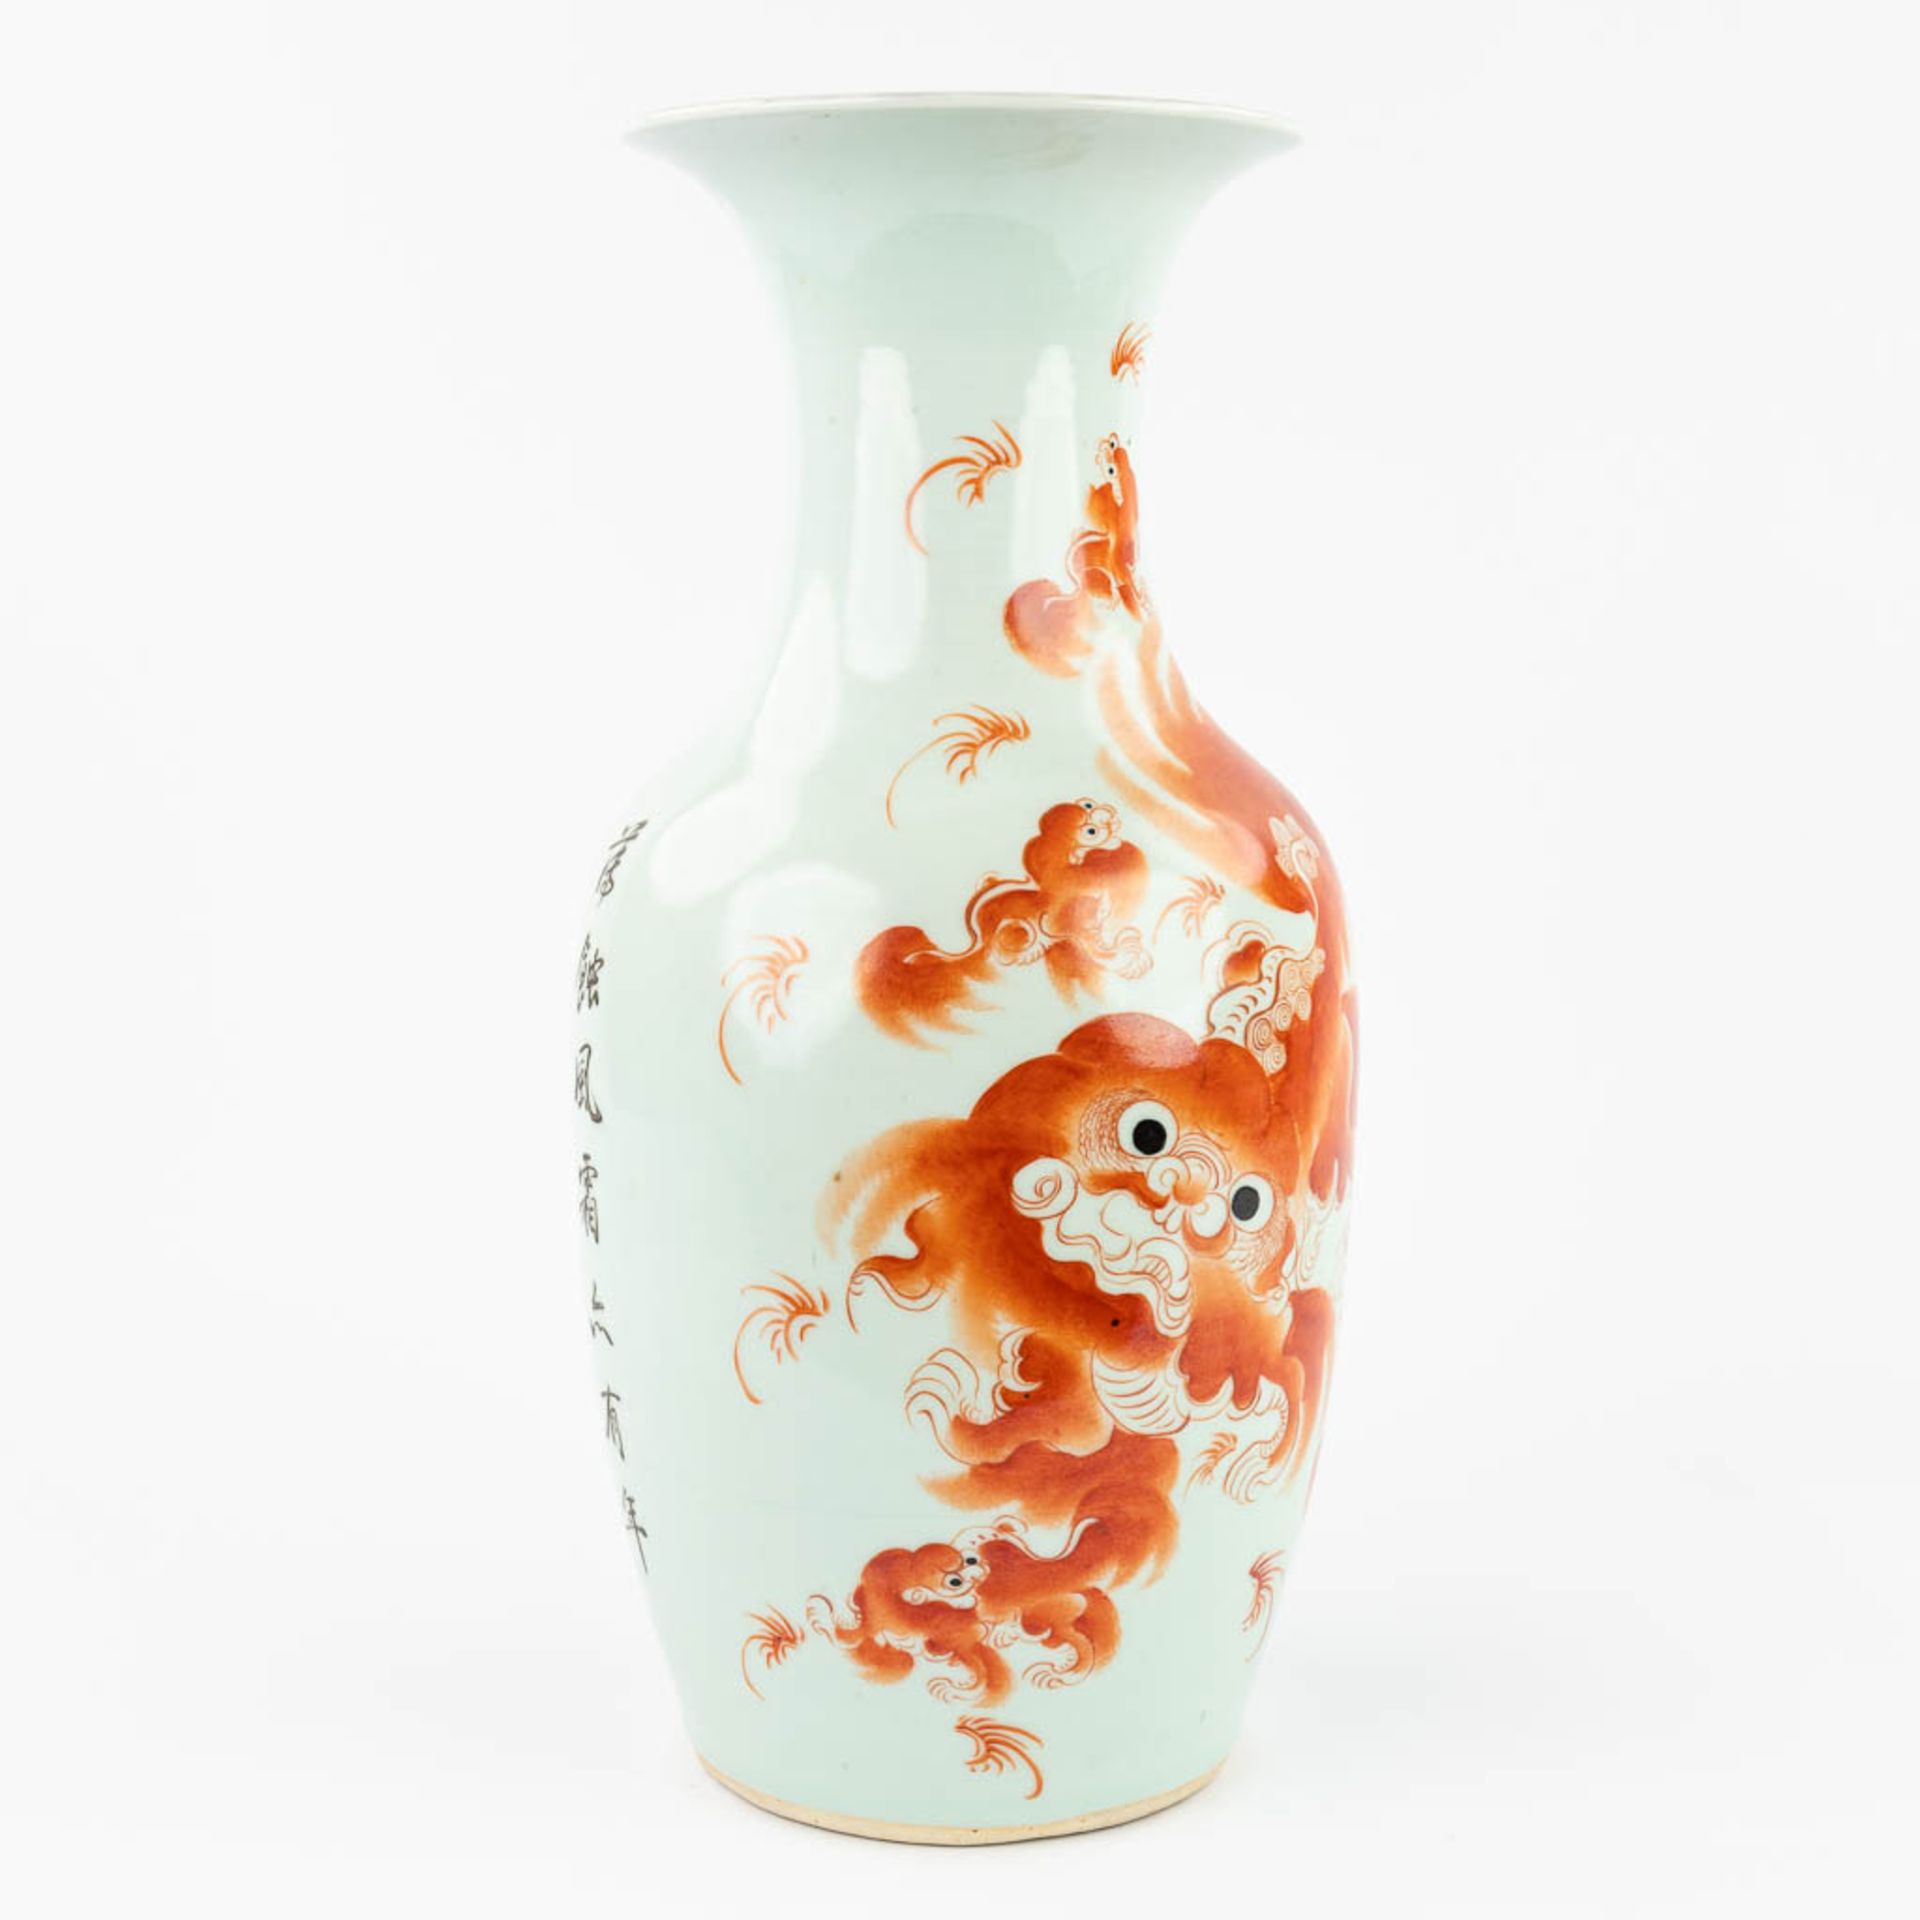 A Chinese vase made of porcelain and decorated with a red foo dog. (44,5 x 21 cm) - Image 6 of 16